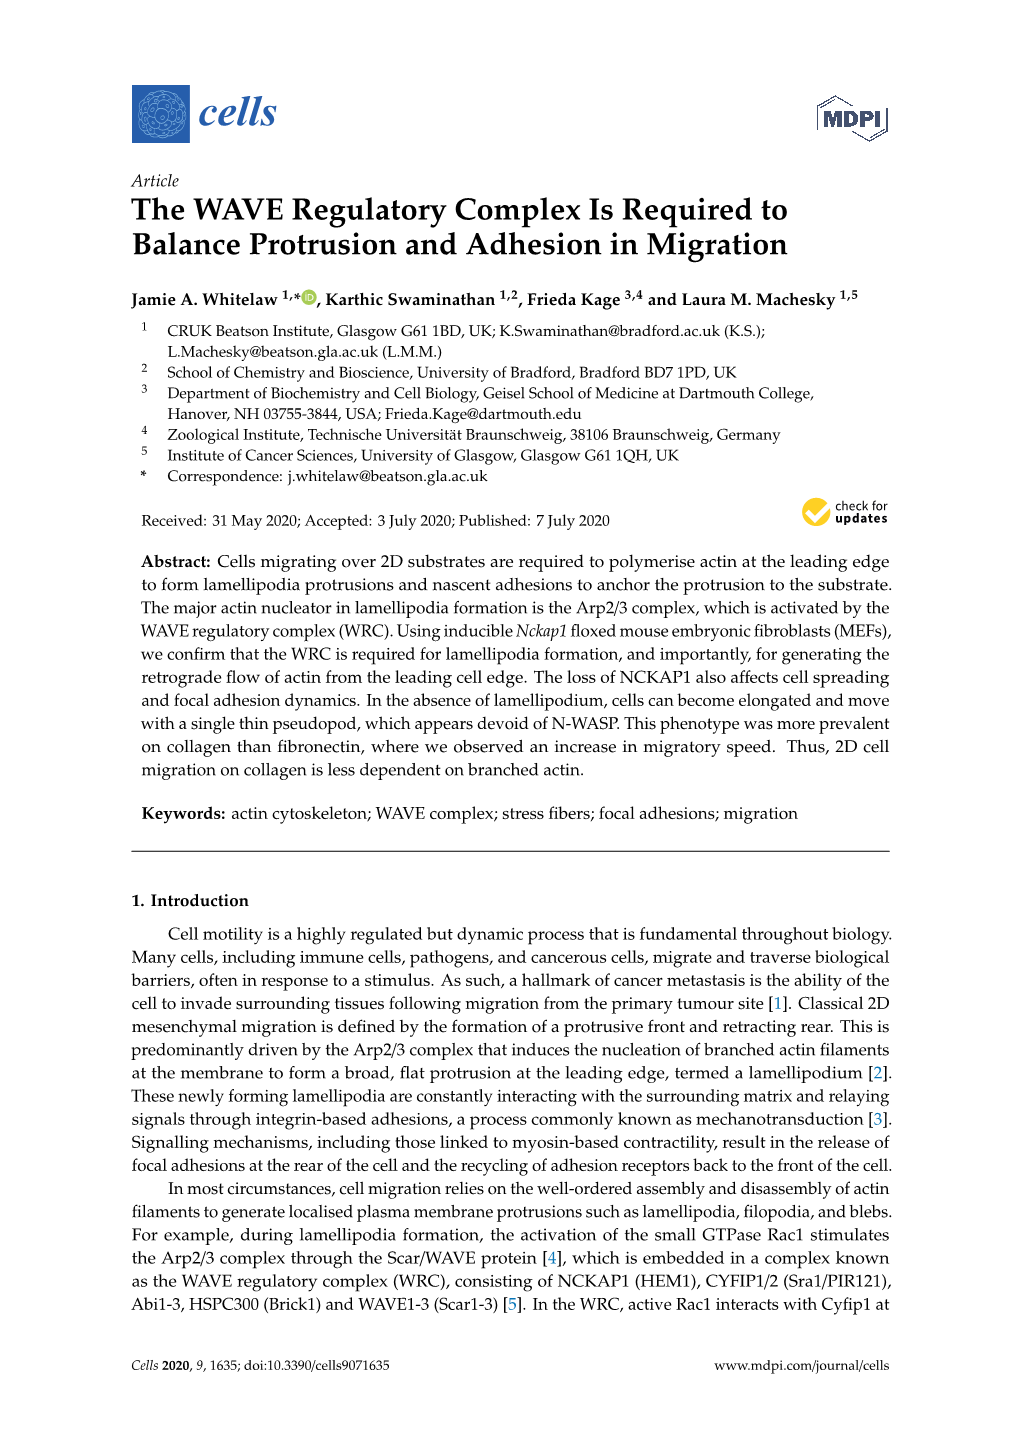 The WAVE Regulatory Complex Is Required to Balance Protrusion and Adhesion in Migration